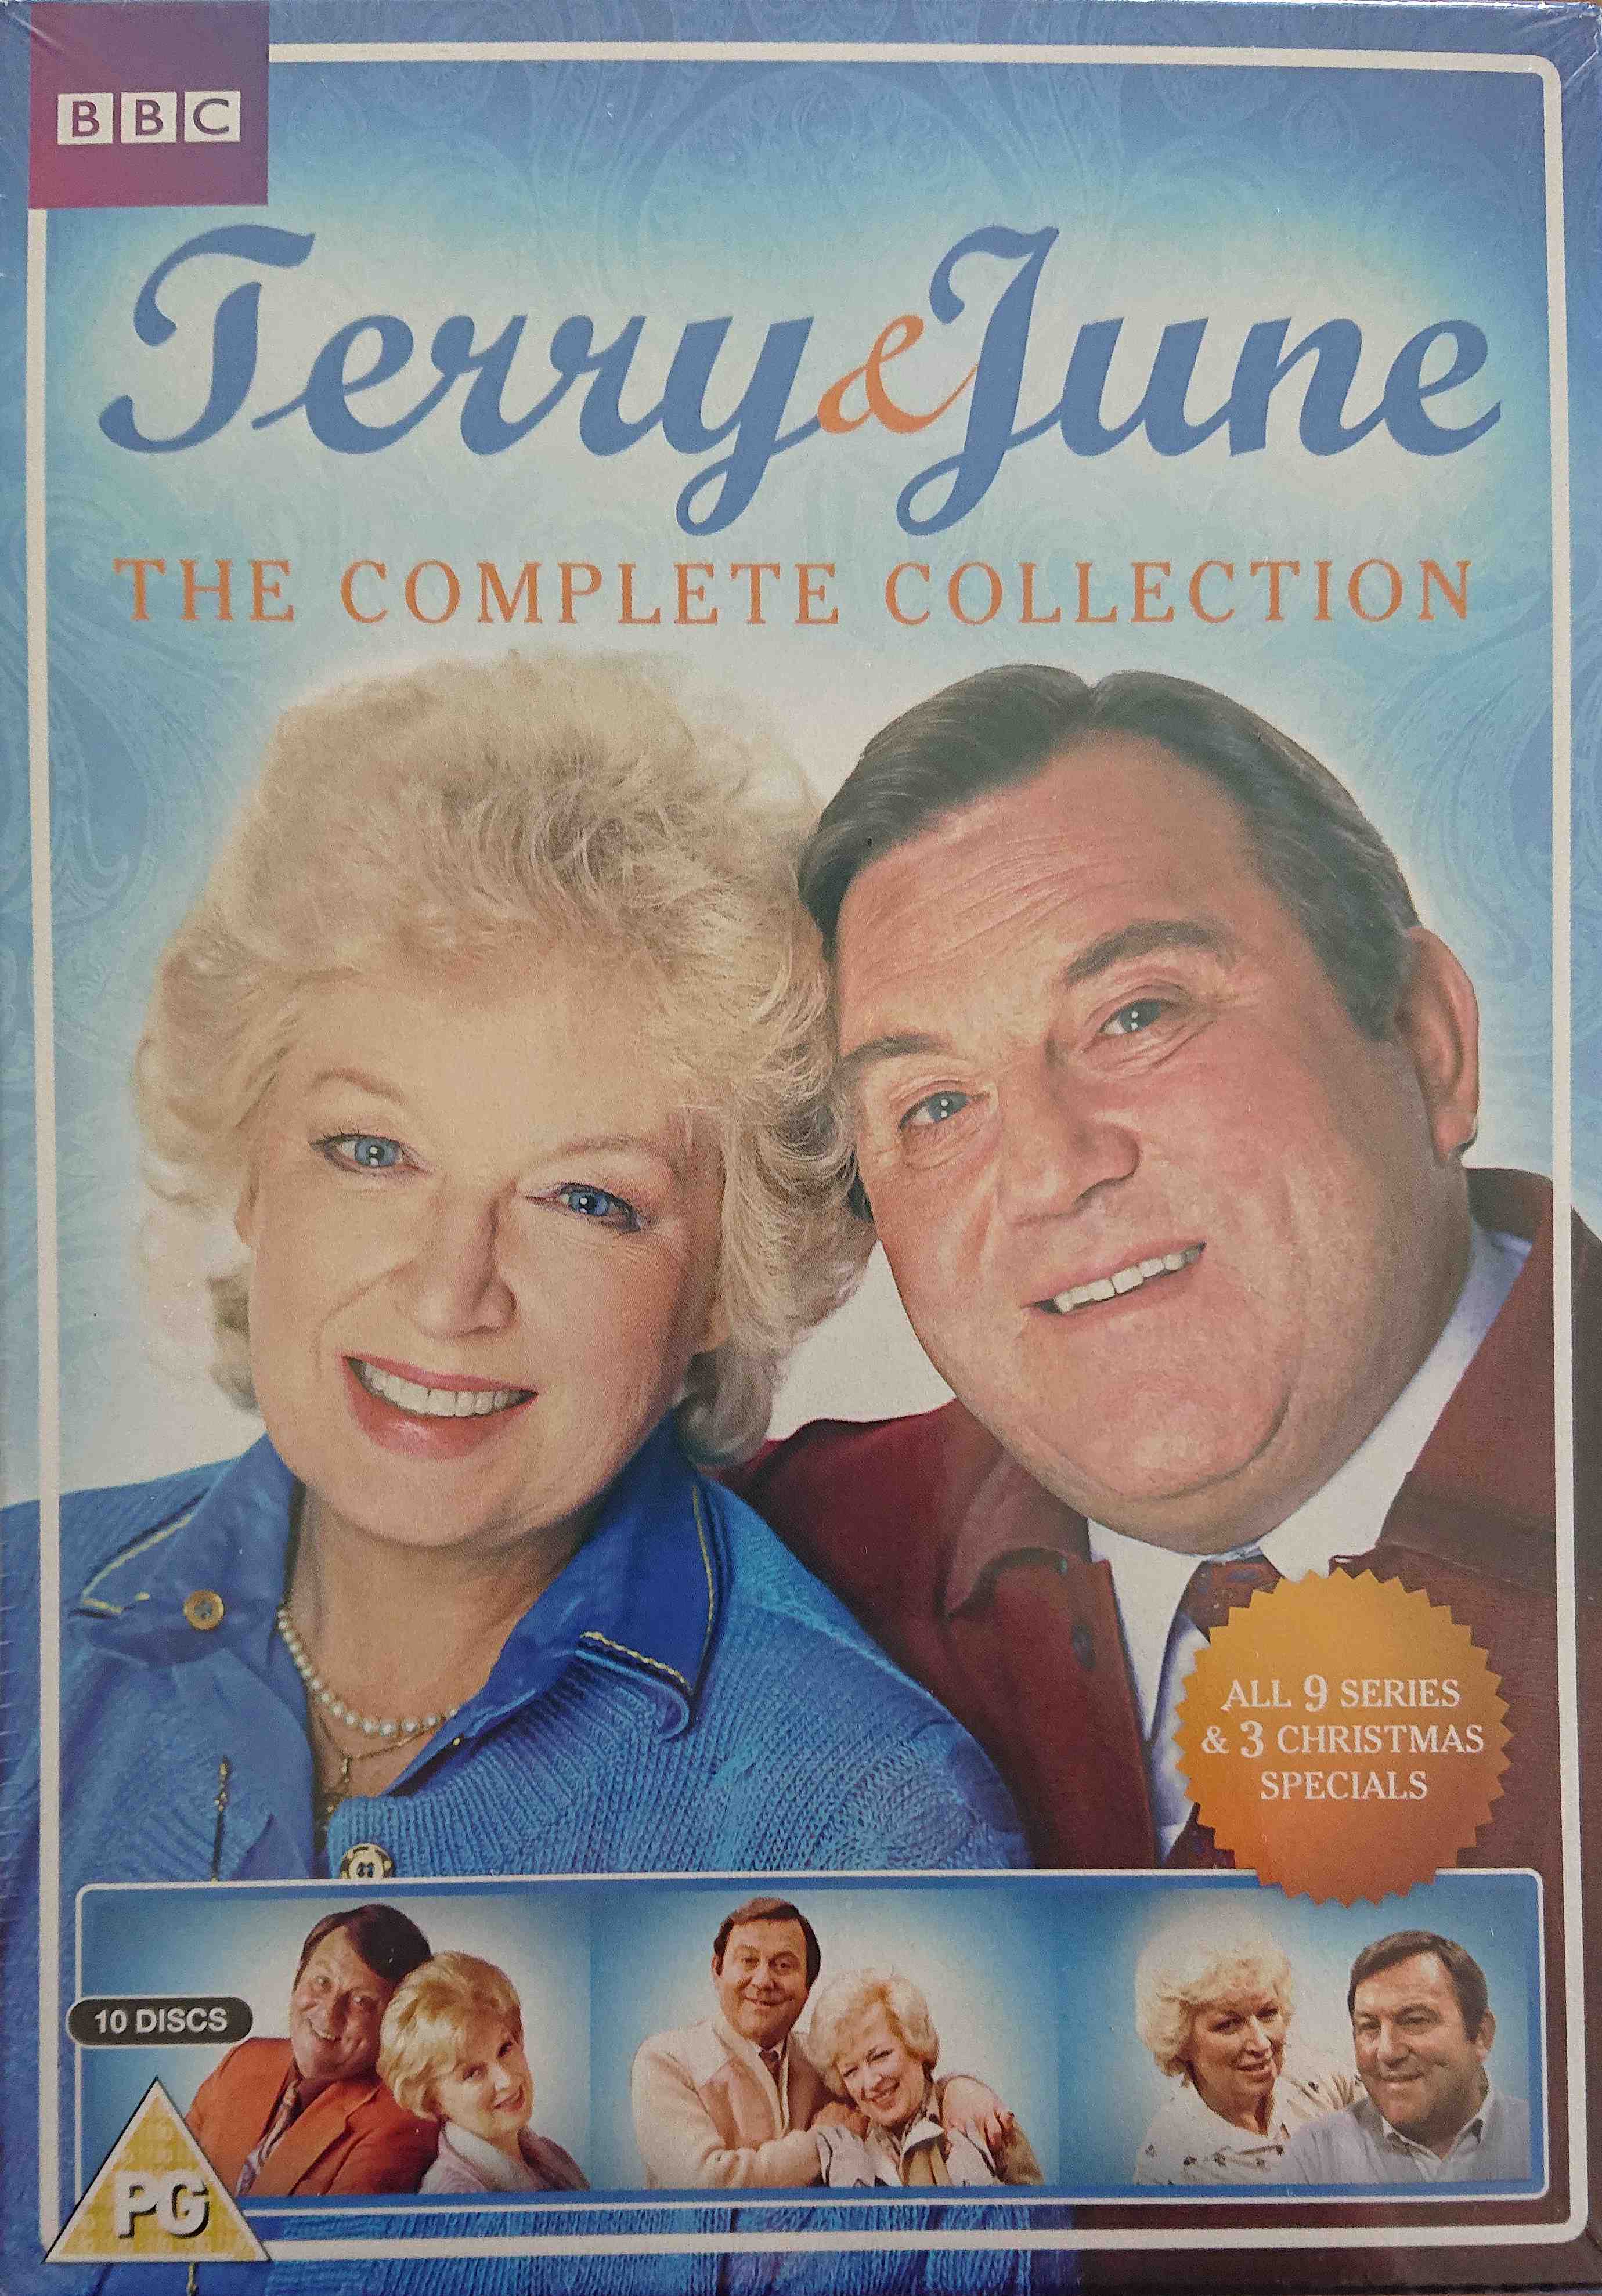 Picture of Terry & June - The complete collection by artist John Kane / Terry Ravenscroft / John Watkins / Dave Freman / Greg Freeman / Colin Bostock Smith from the BBC dvds - Records and Tapes library